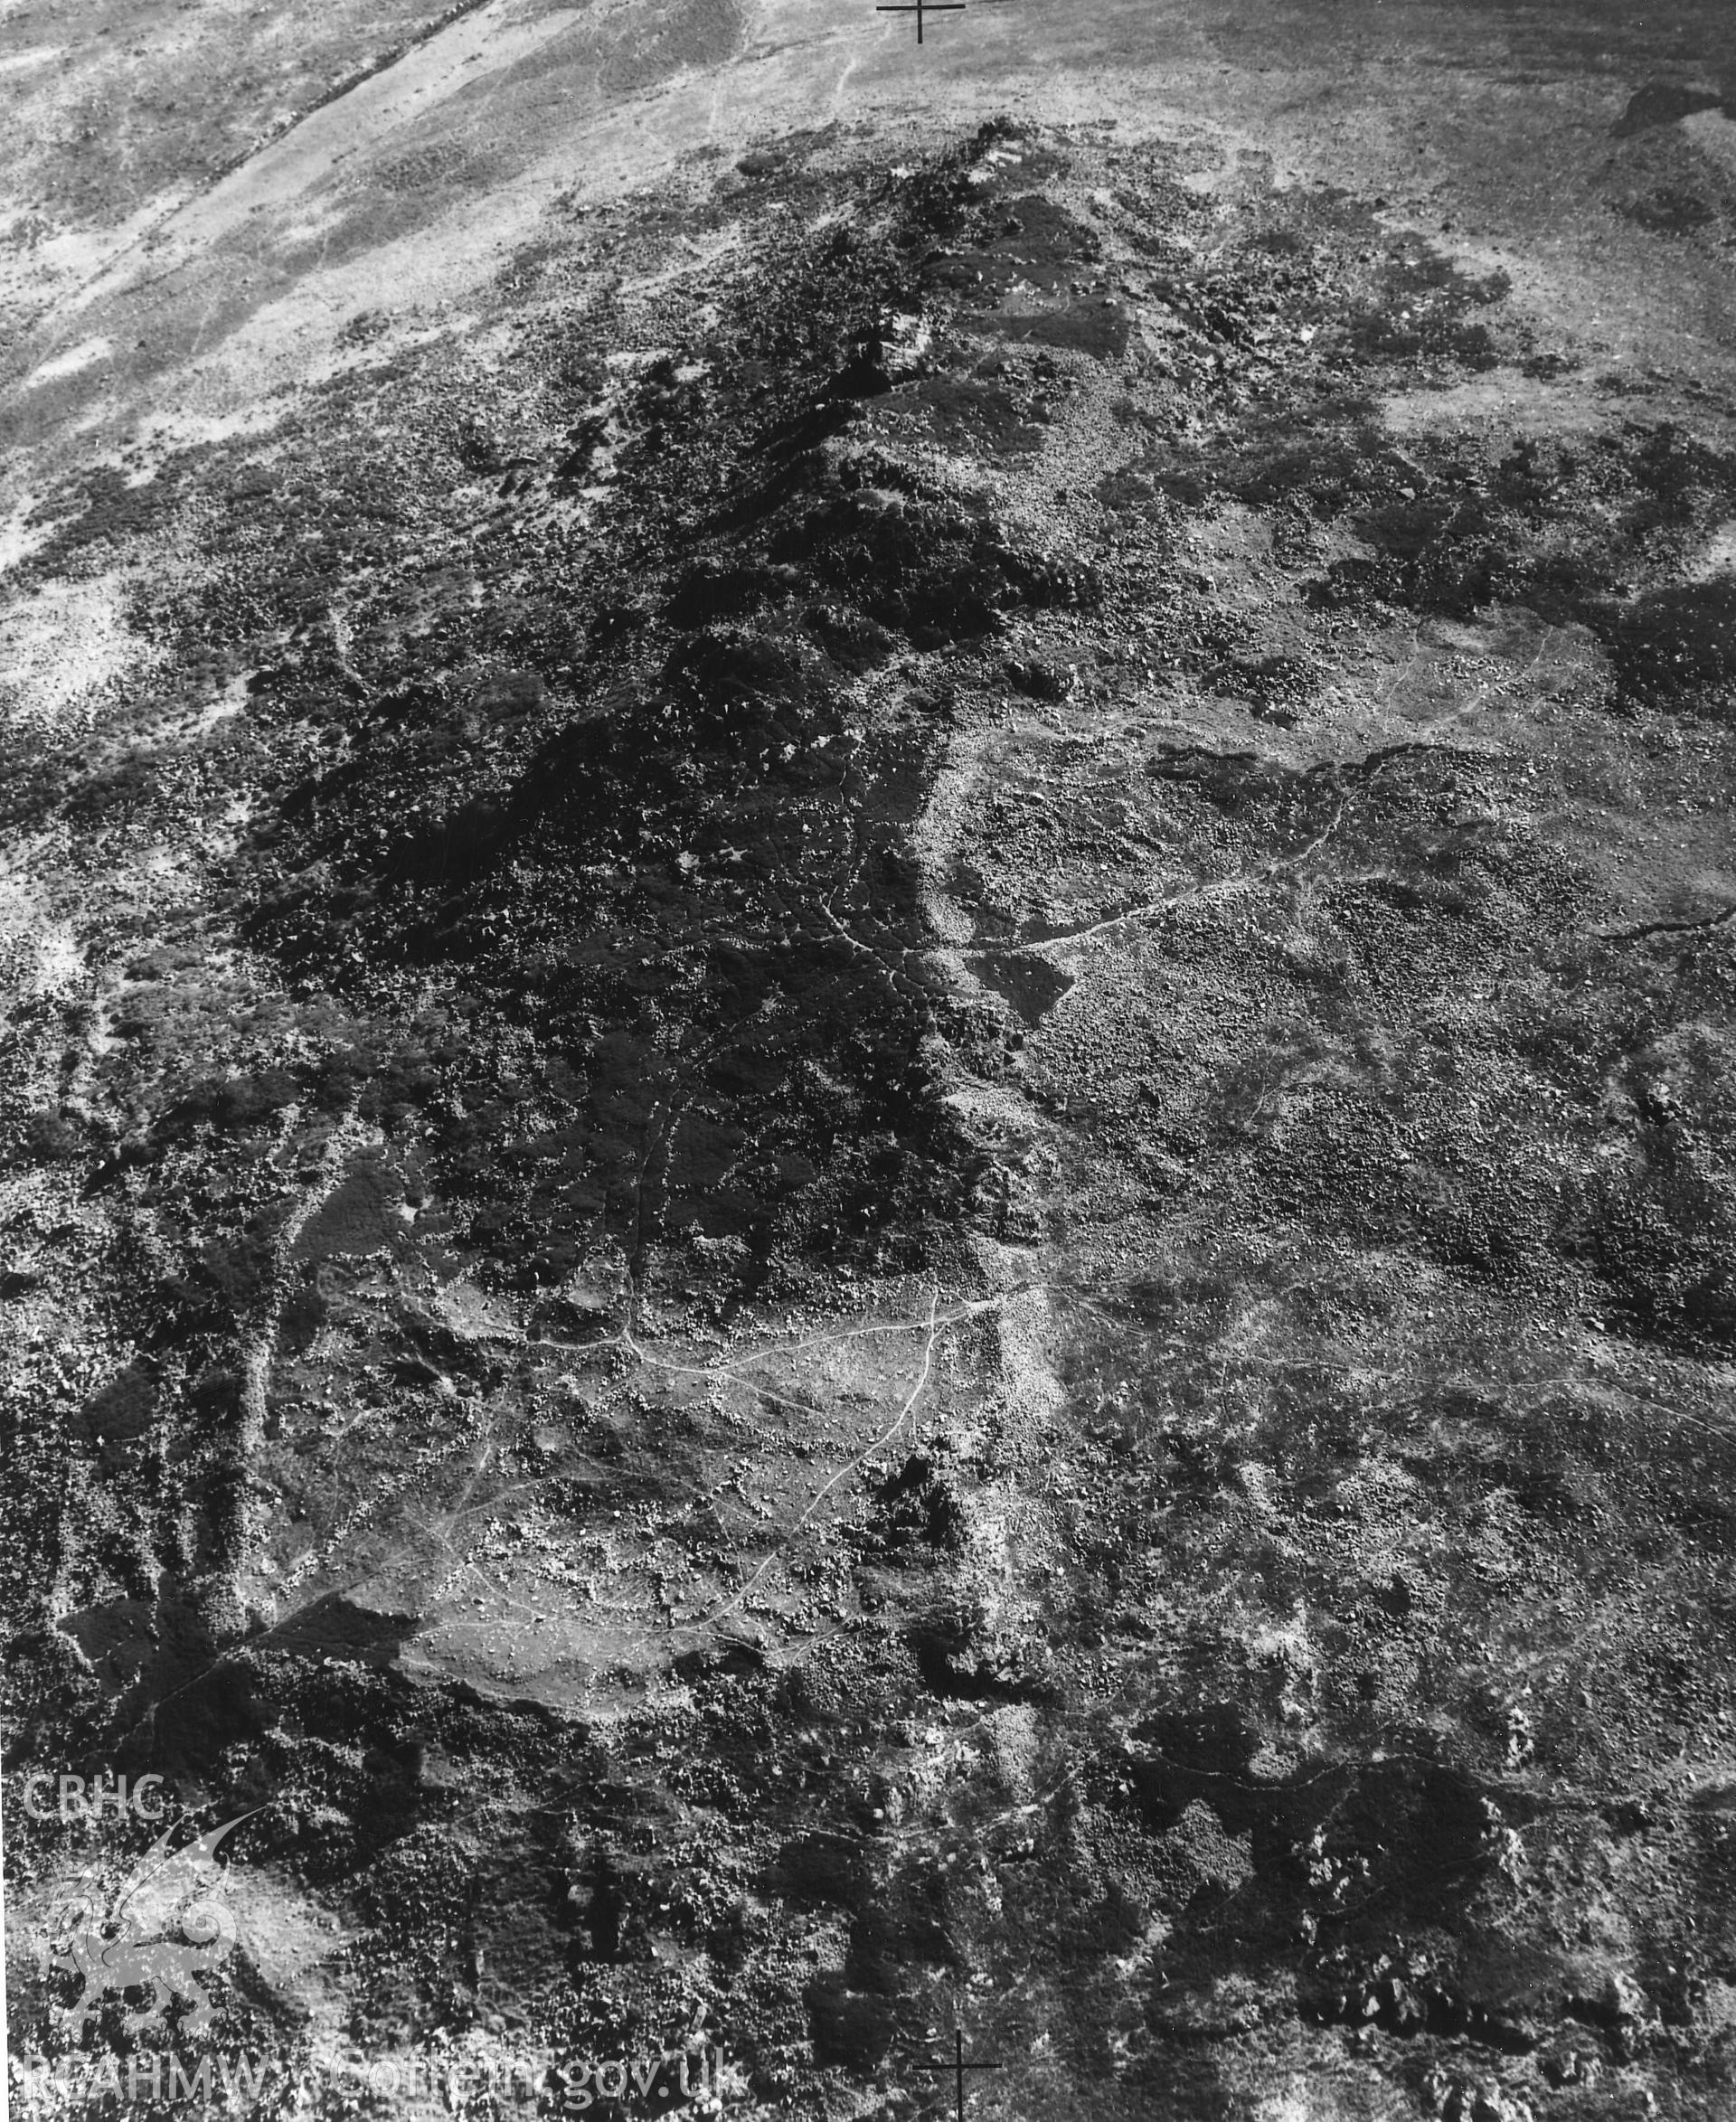 Black and white aerial photograph showing Carn Ingli Camp, taken by Cambridge University Committee for Aerial Photography.